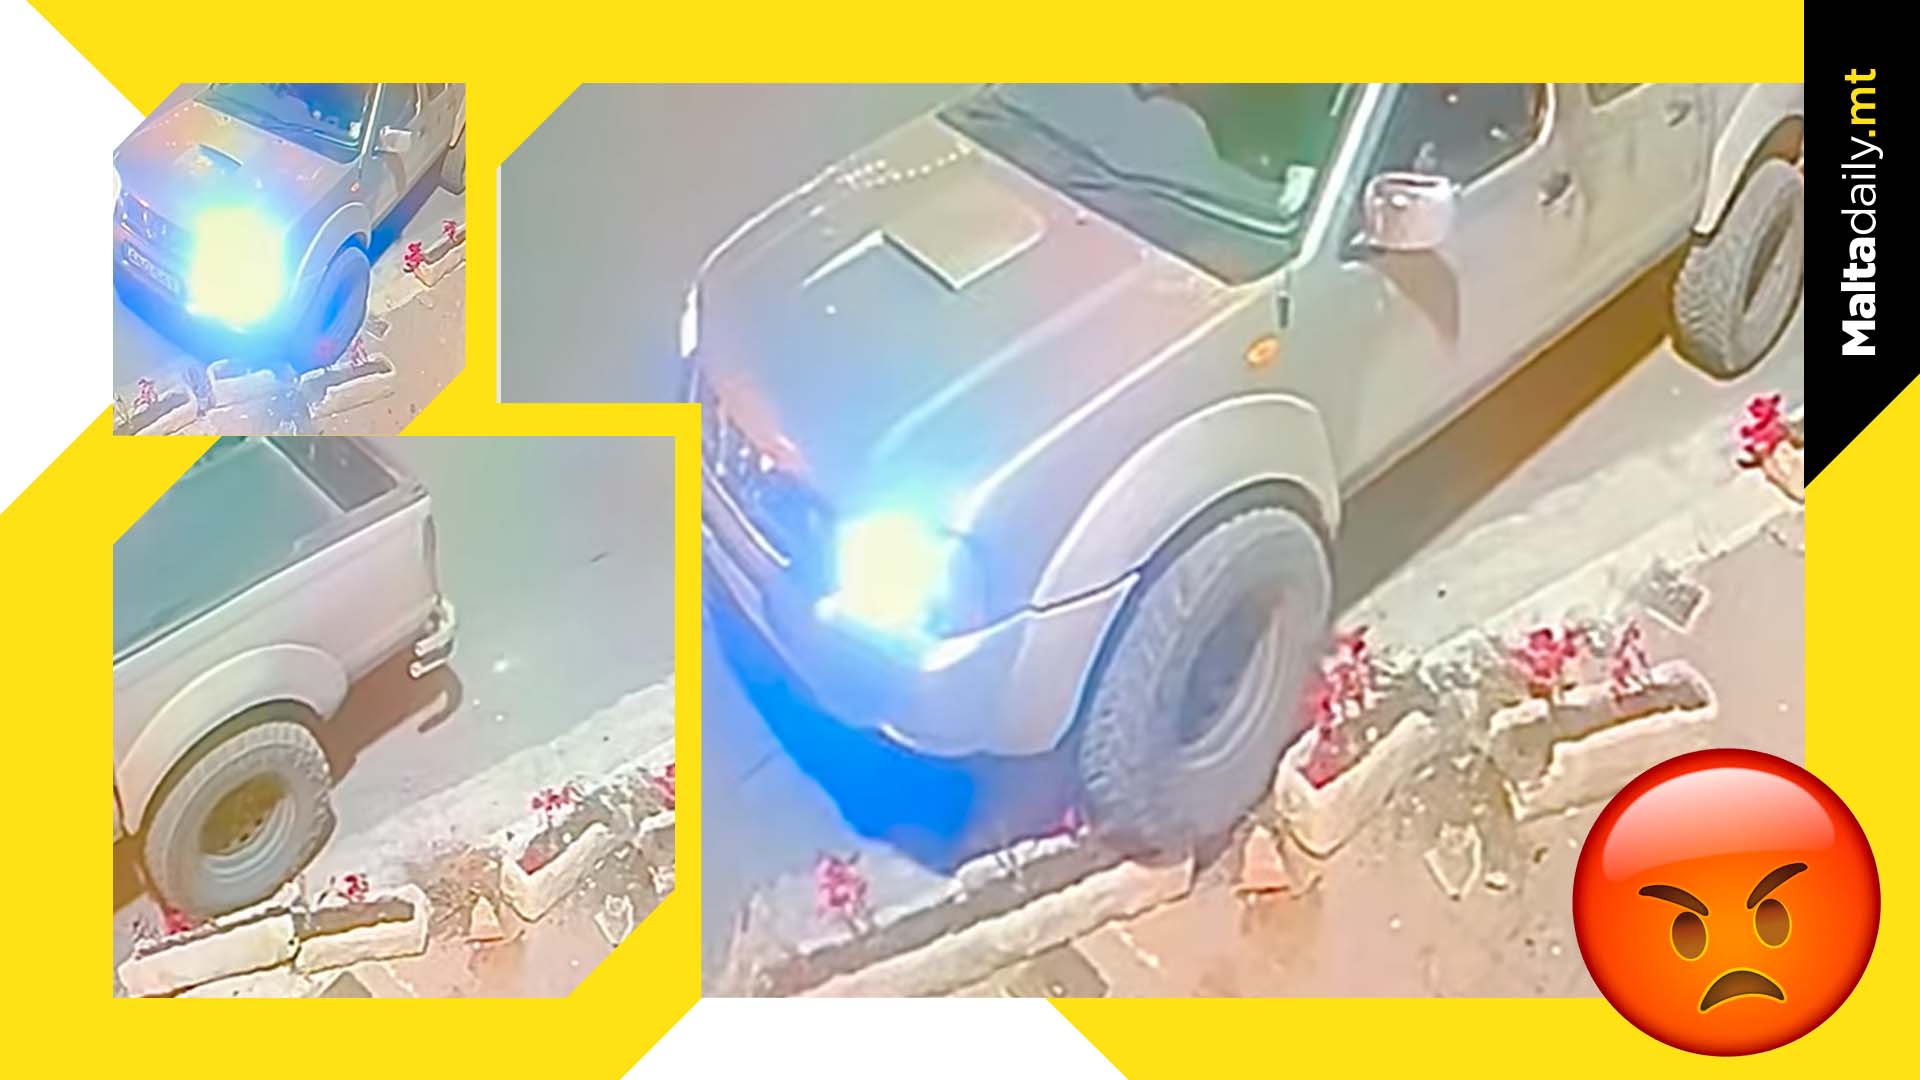 CCTV shows car intentionally driving over restaurant plant pots